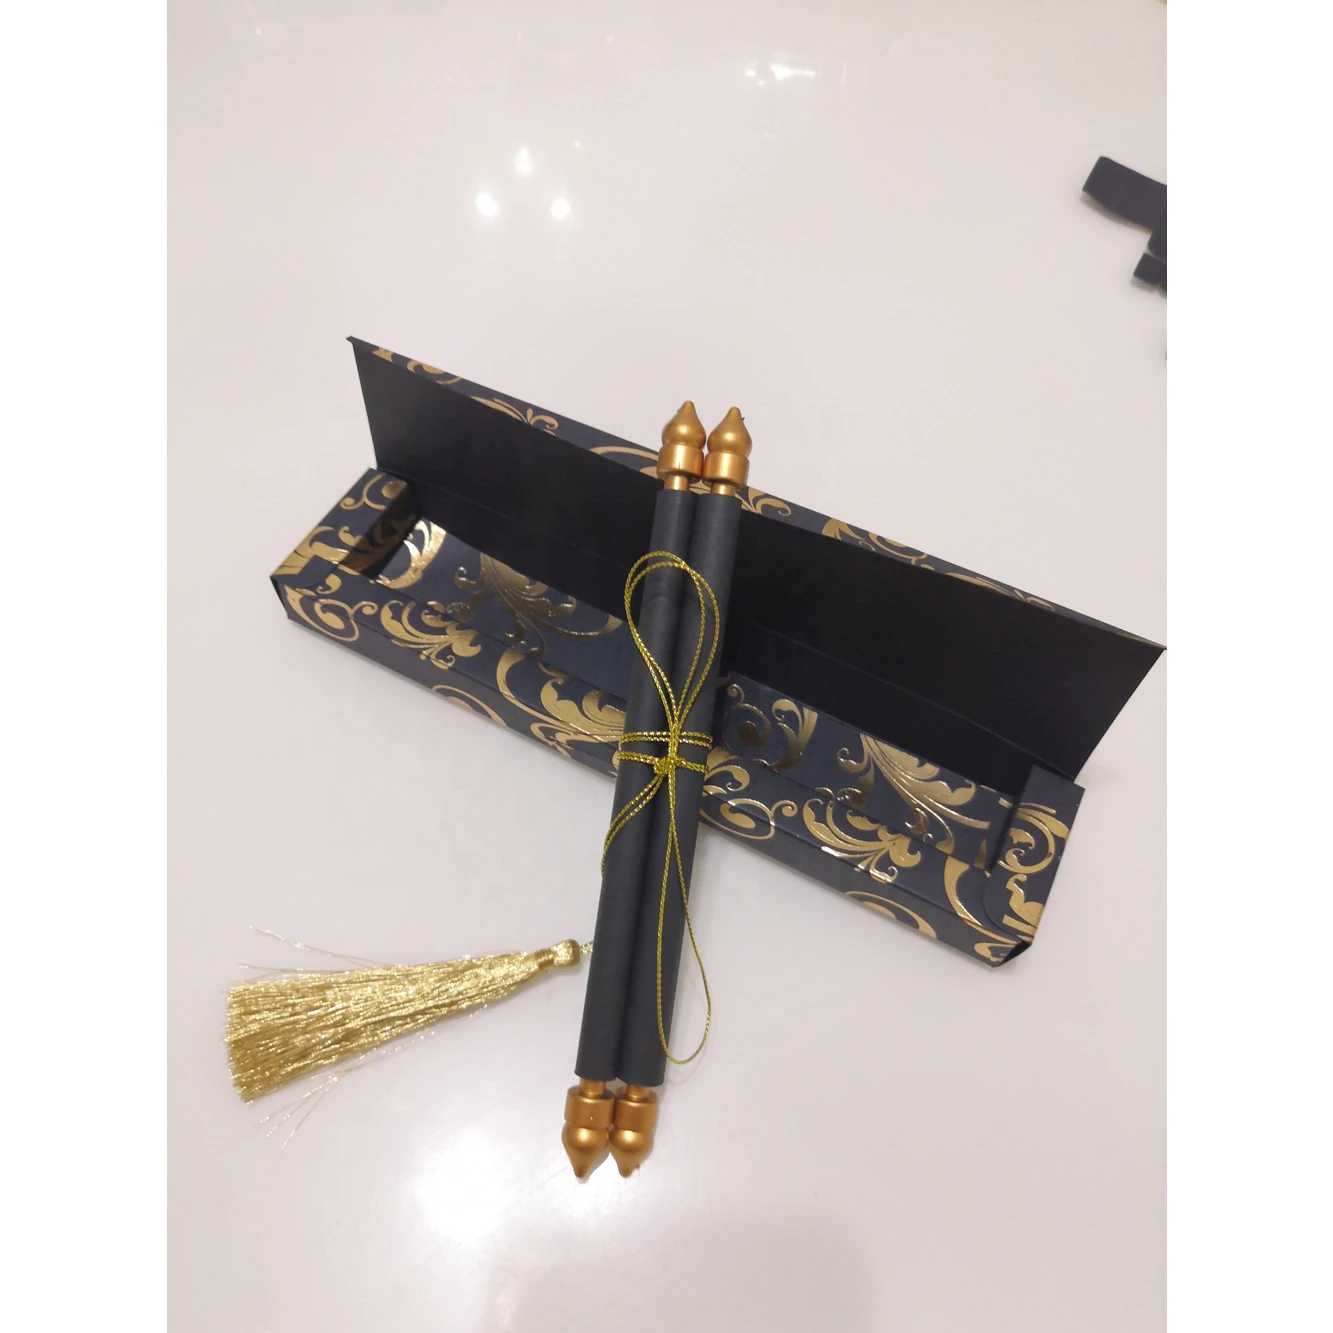 2020 Newest  Luxury Royal Indian Design Black Scroll Wedding Invitation Cards with Gold Foil